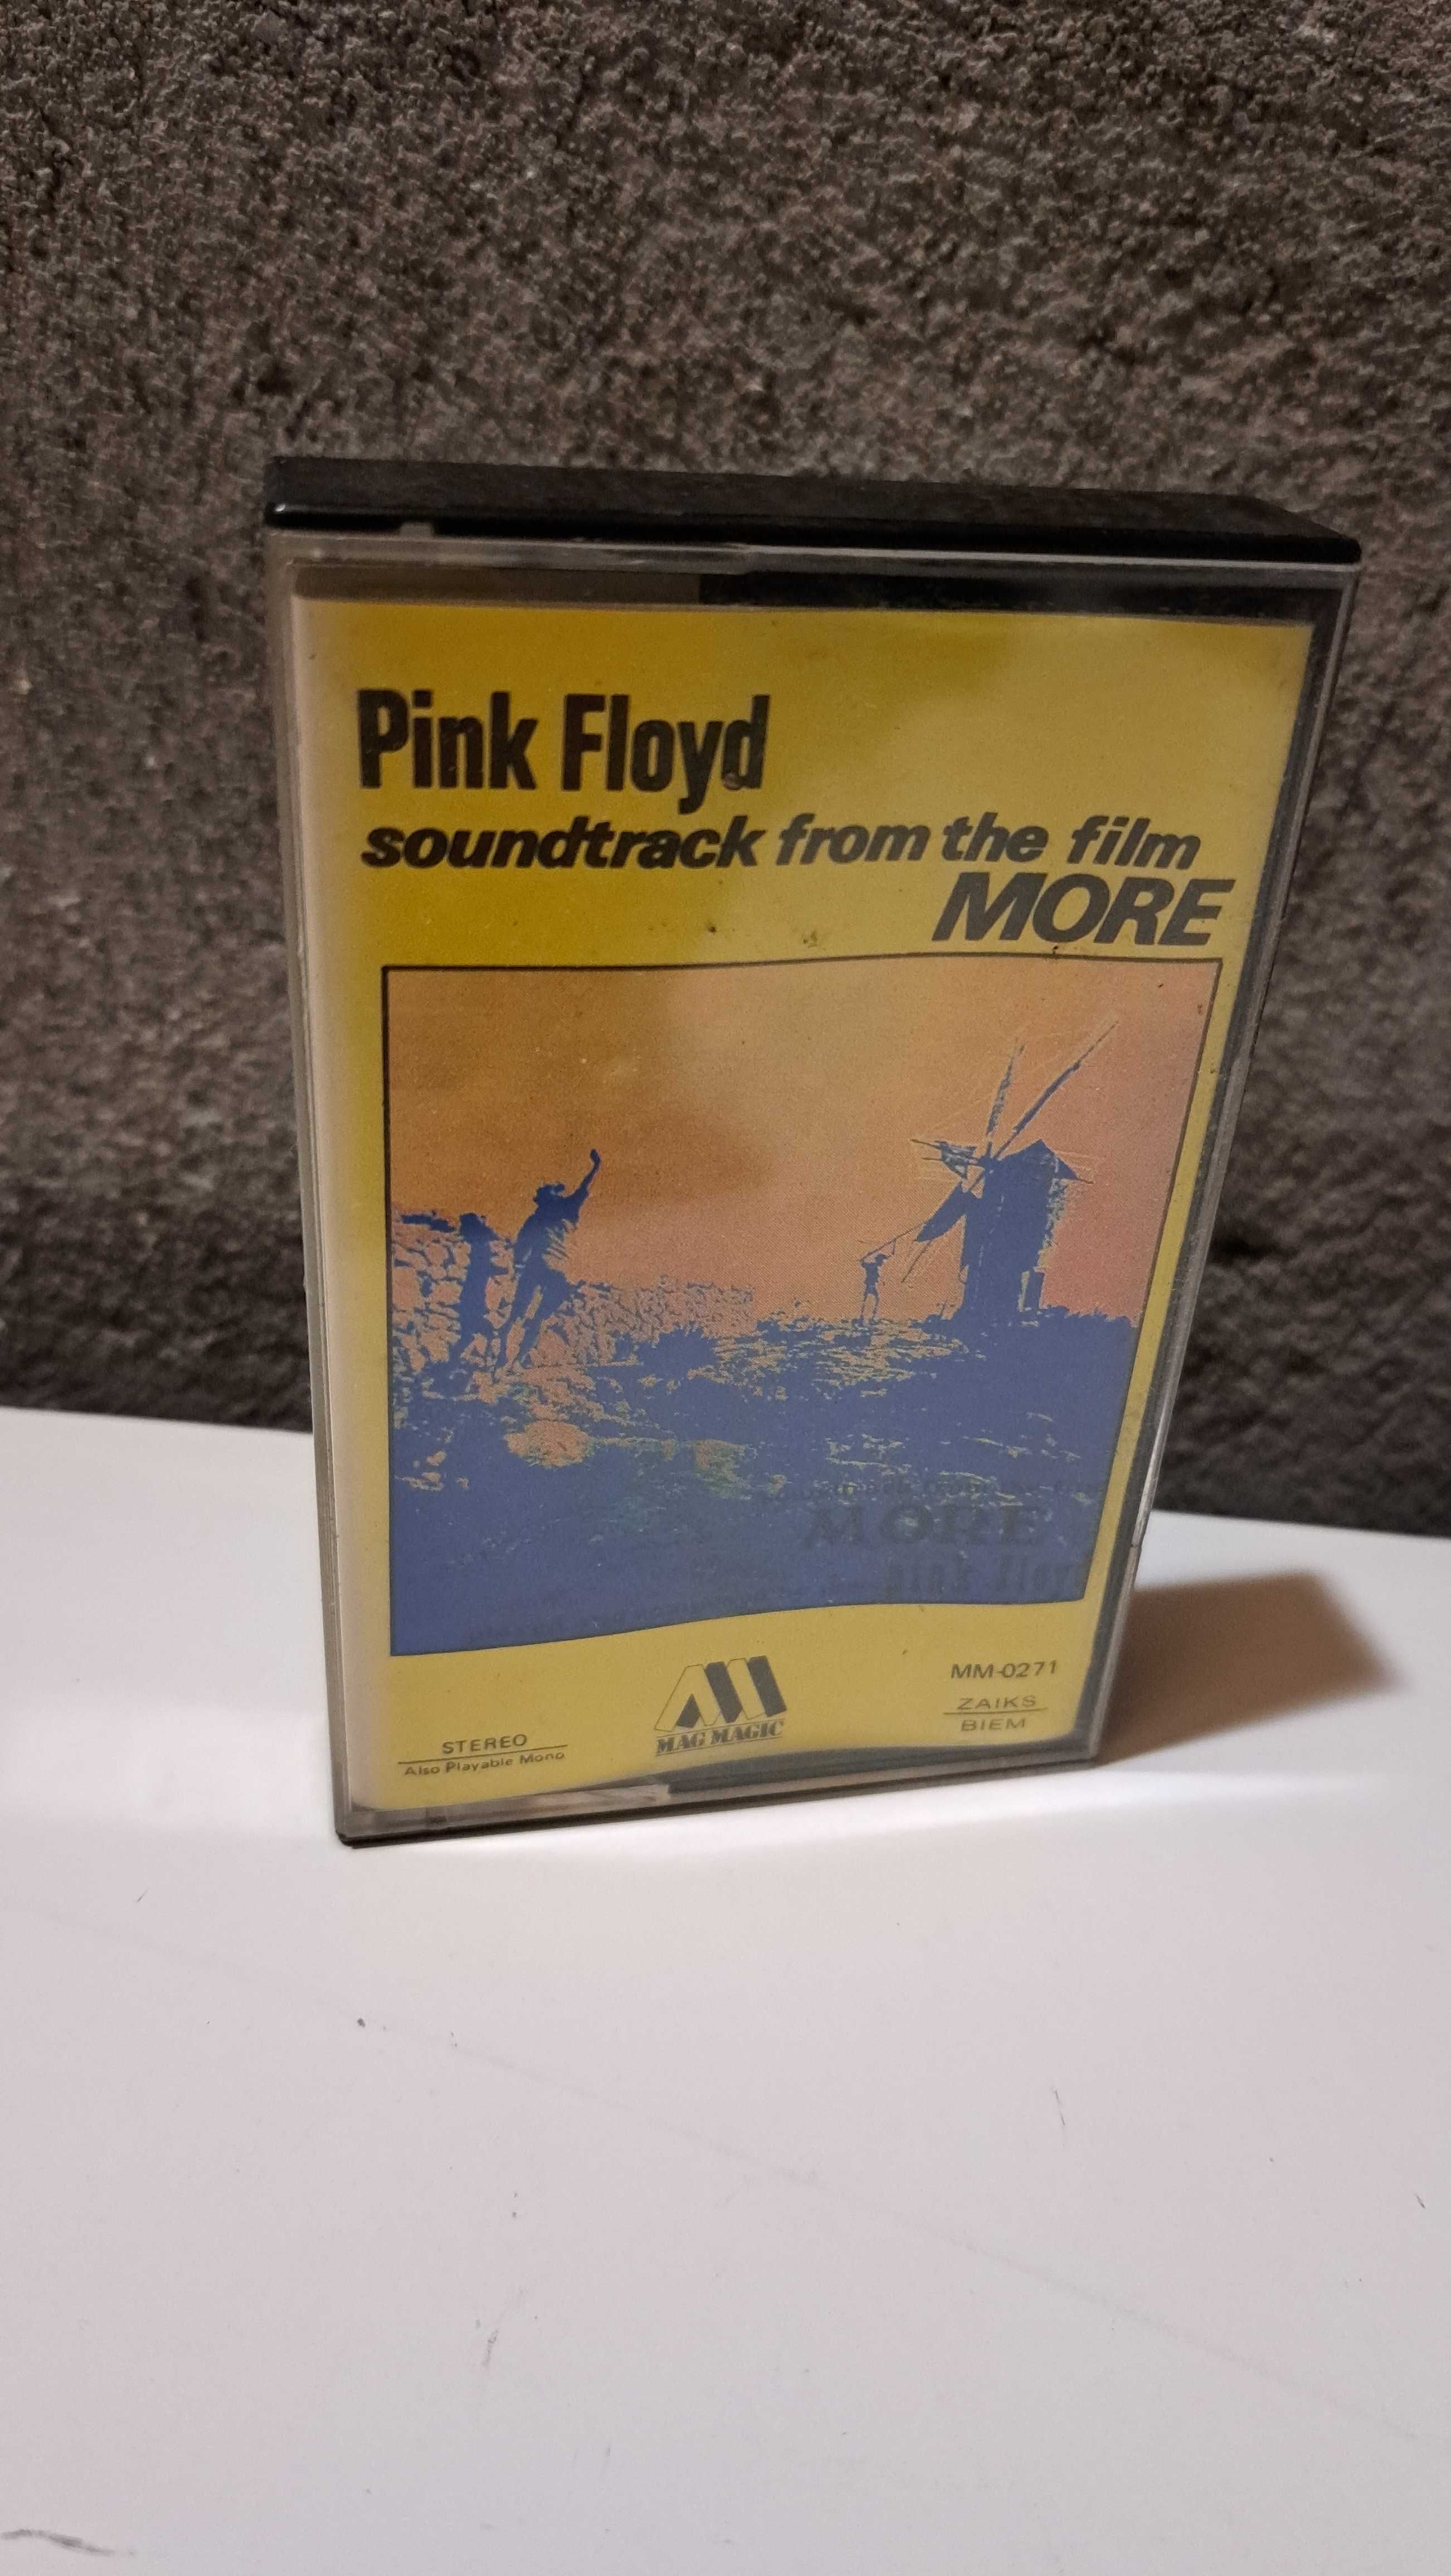 PINK FLOYD soundtrack from the film MORE kaseta audio